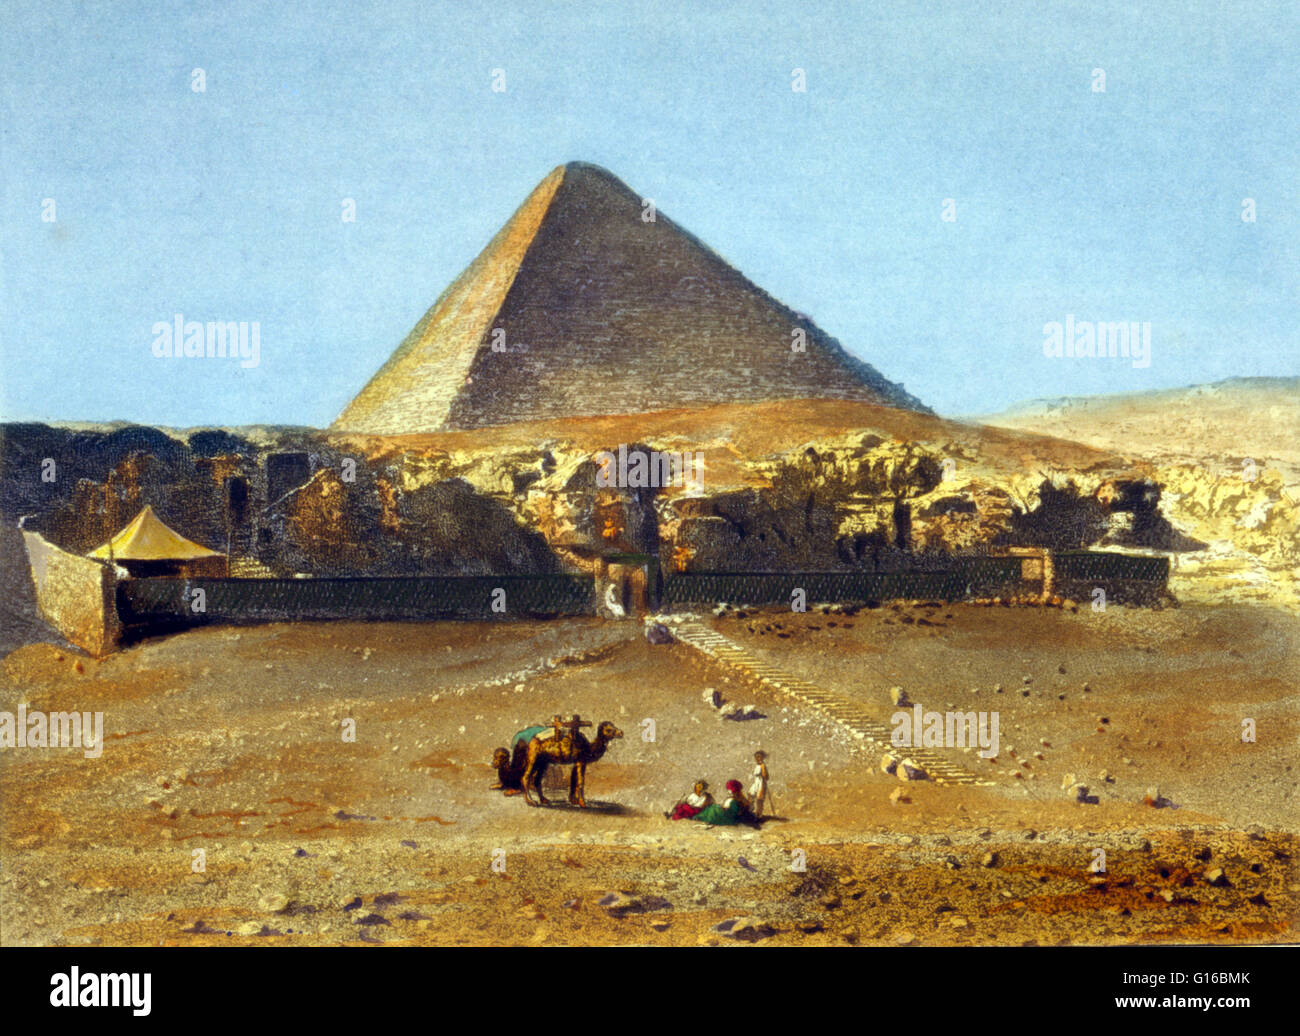 Entitled: 'Pyramide de Cheops - daguerreotype, N.P. Lerebours'. View of the pyramid with people and camels in the foreground. The Great Pyramid of Giza is the oldest and largest of the three pyramids in the Giza Necropolis bordering what is now El Giza, E Stock Photo